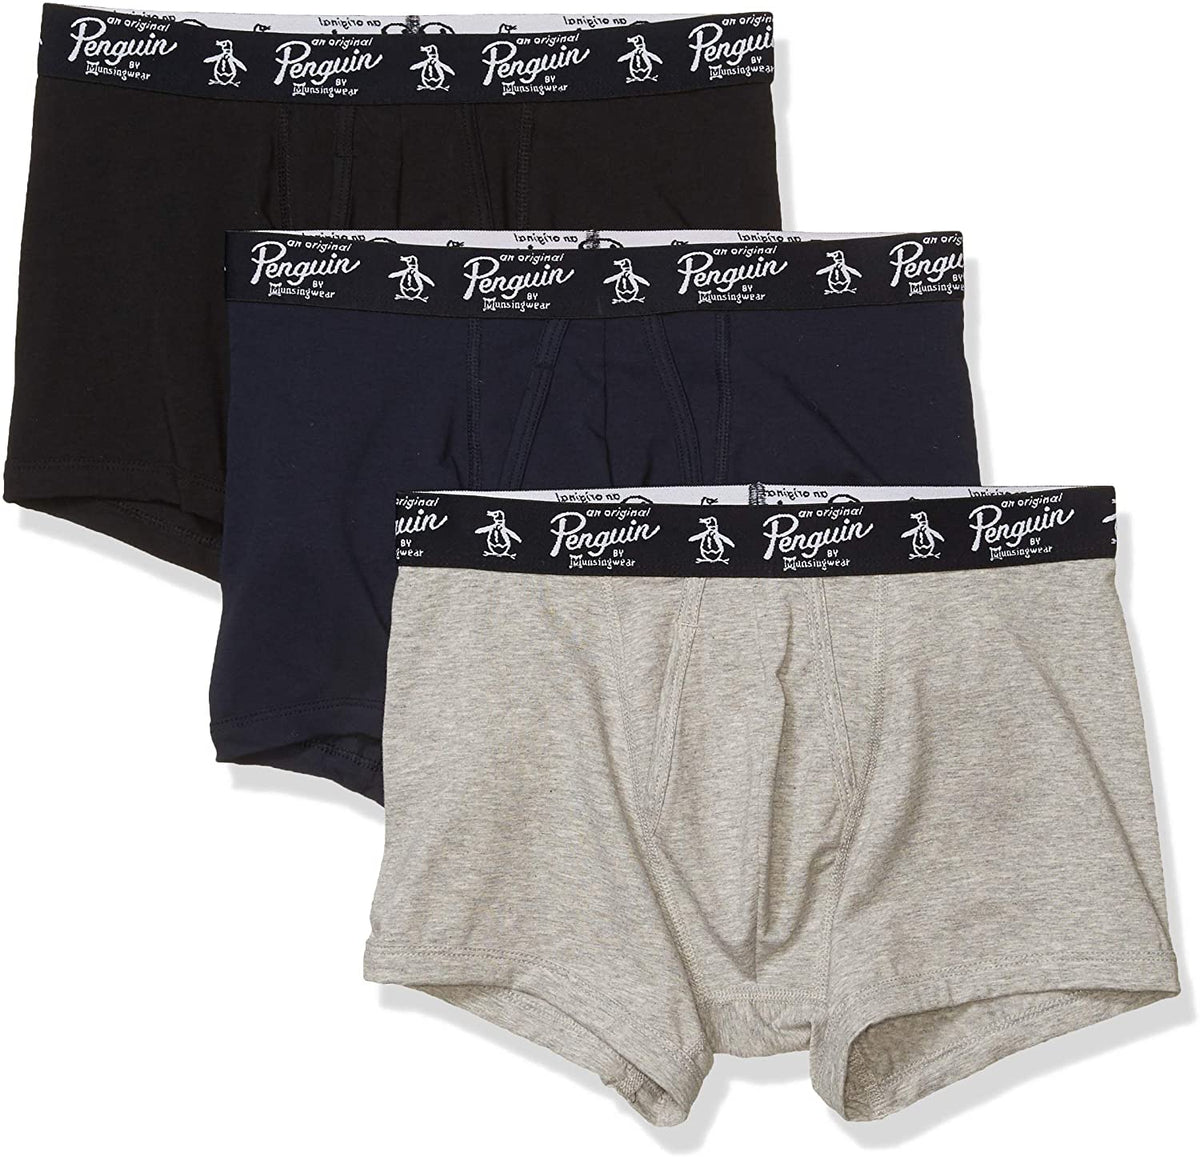 Black Navy and Grey Boxers - 3 Pack Boxed